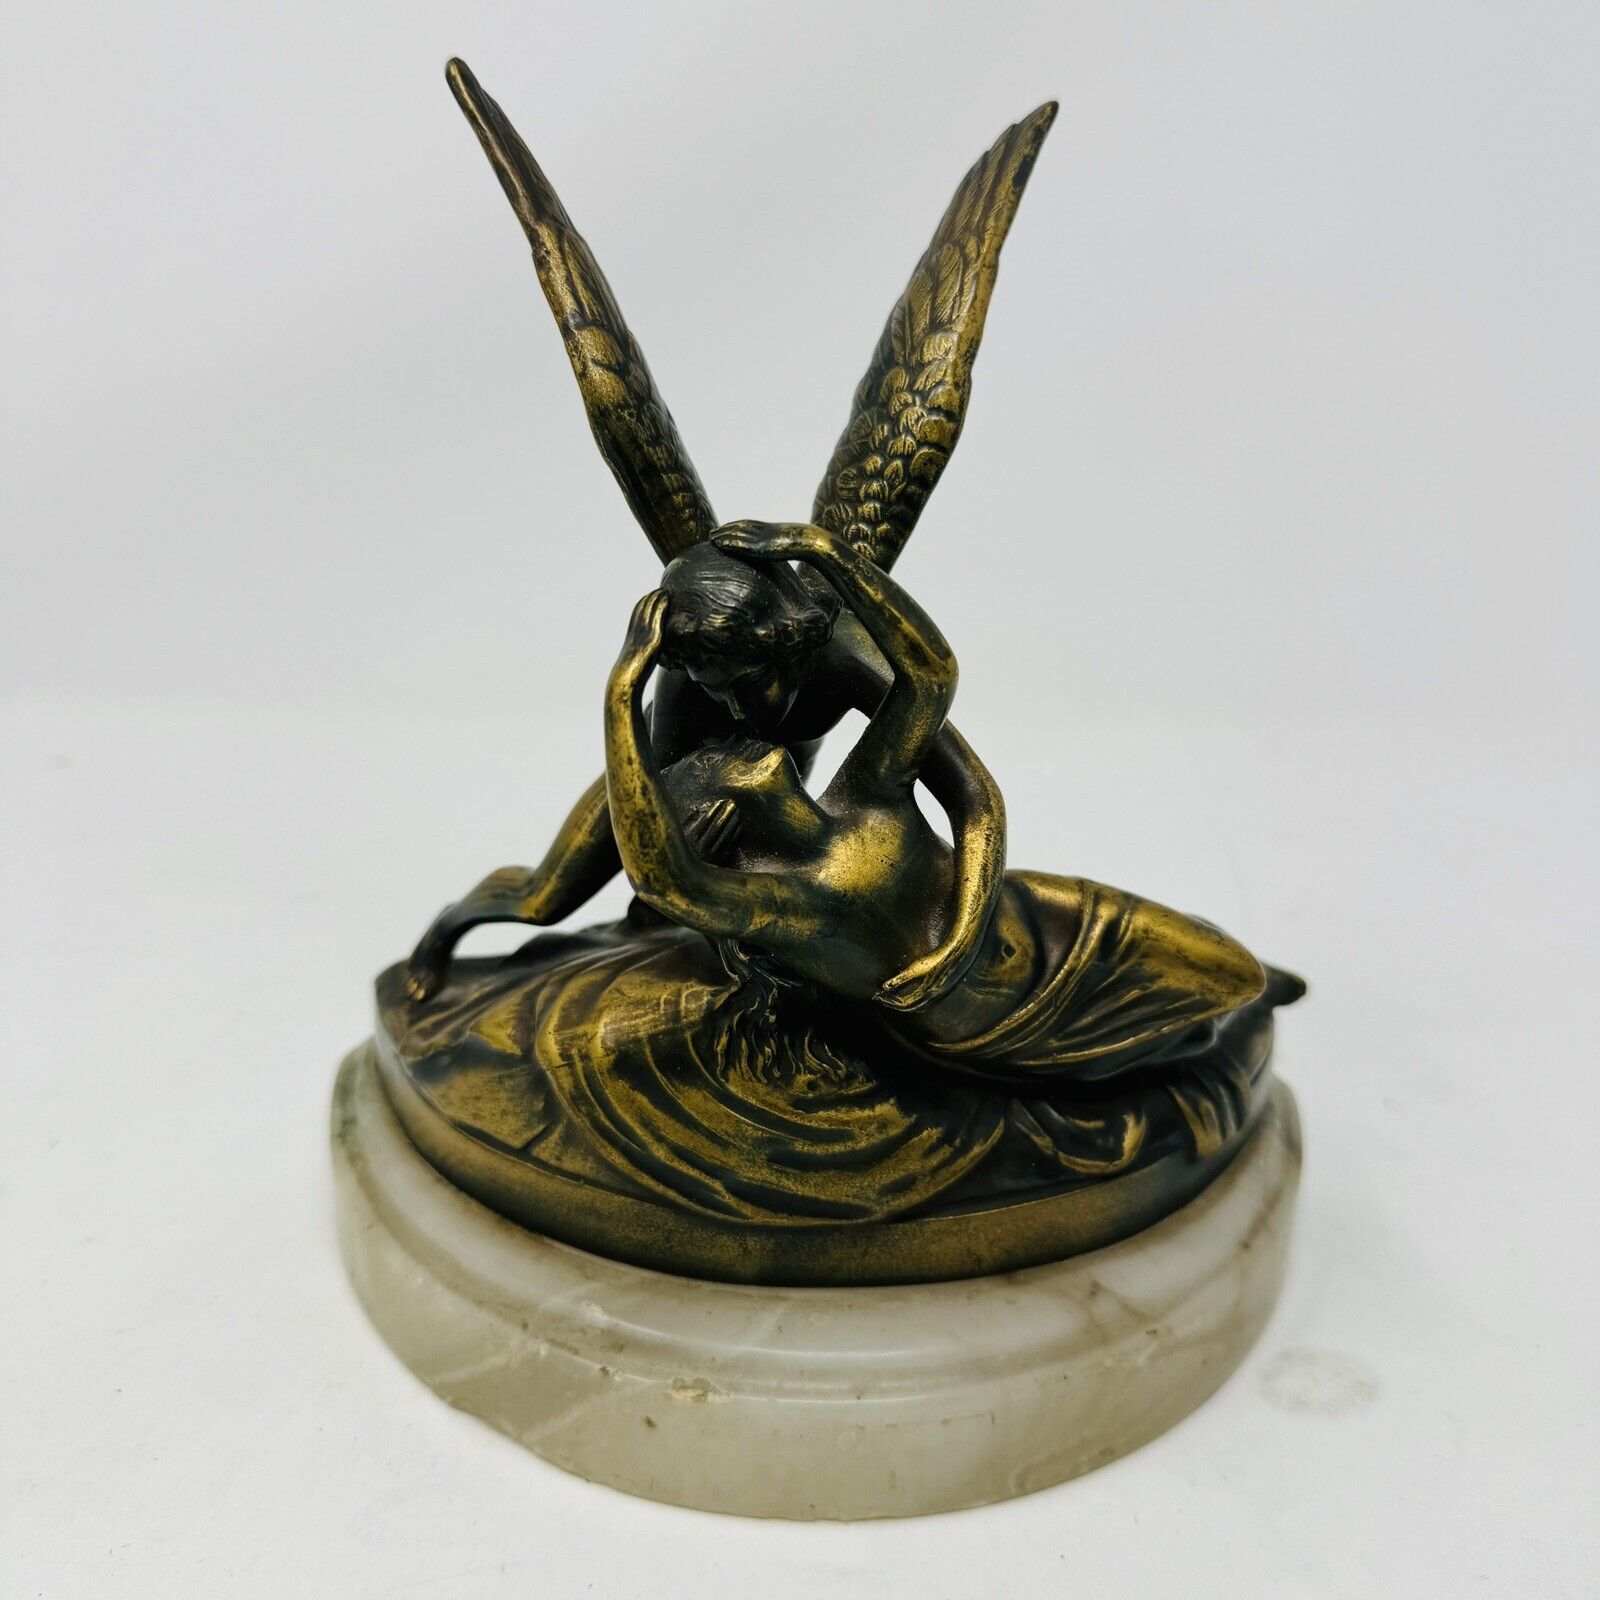 Antique Vintage CUPID / EROS and PSYCHE STATUETTE FIGURINE - Bronze On Stone